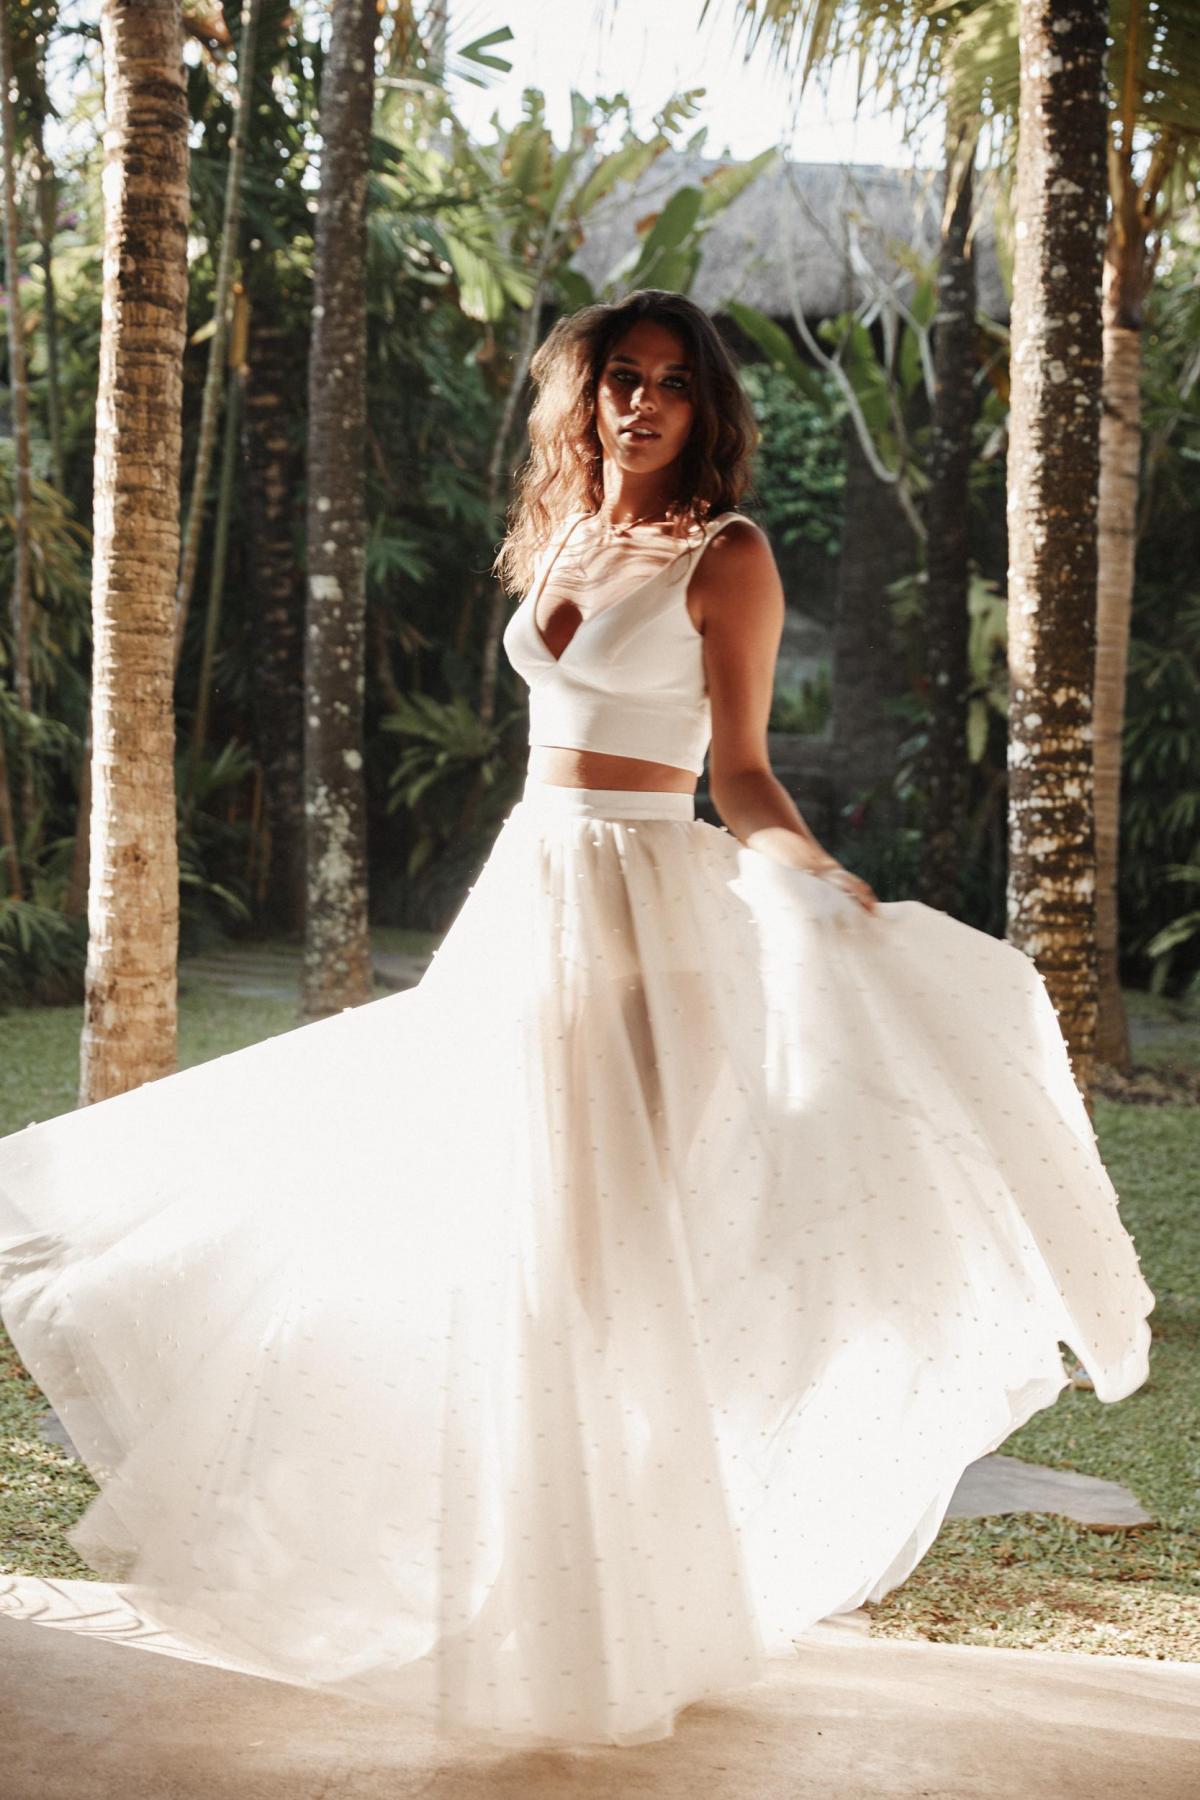 The Erin & Lea two piece wedding dress by Karen Willis Holmes, pearl wedding skirt and bridal crop top.